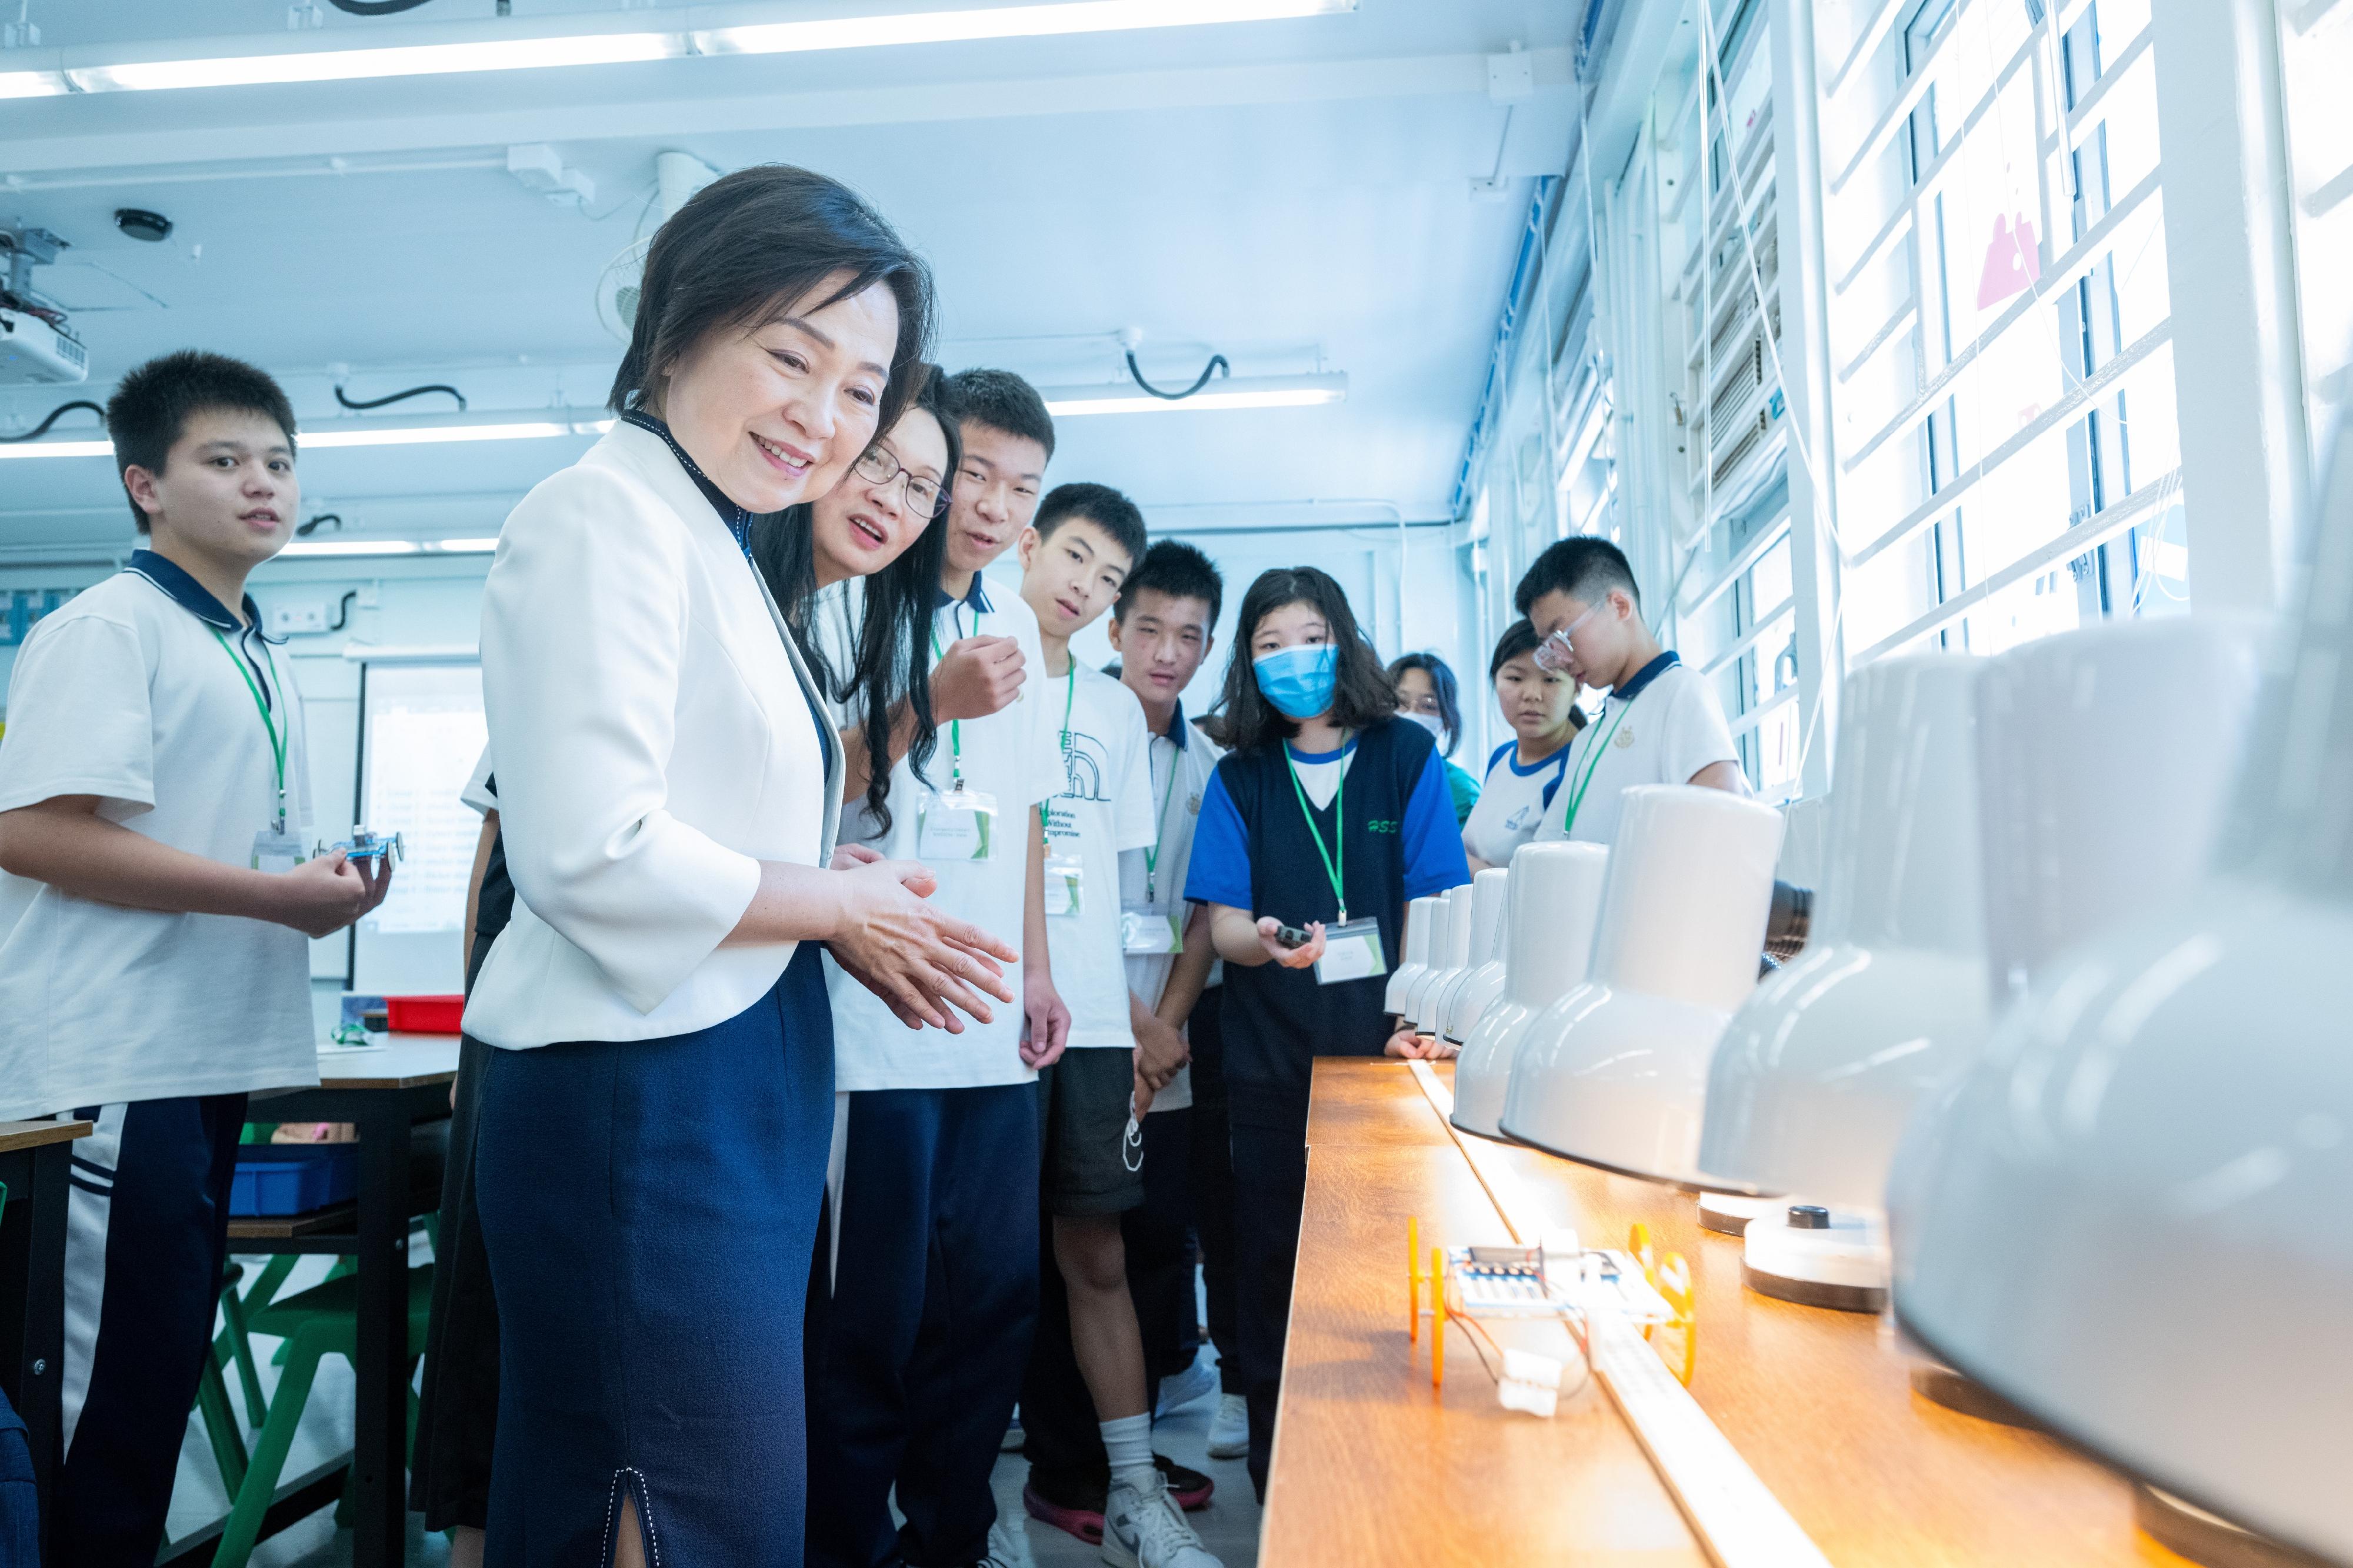 The Secretary for Education, Dr Choi Yuk-lin, visited Hotung Secondary School today (July 11) to attend its sister school exchange activity with Dong Guan Tung Wah Junior High School. Photo shows Dr Choi (second left) observing the making of solar model cars by students.